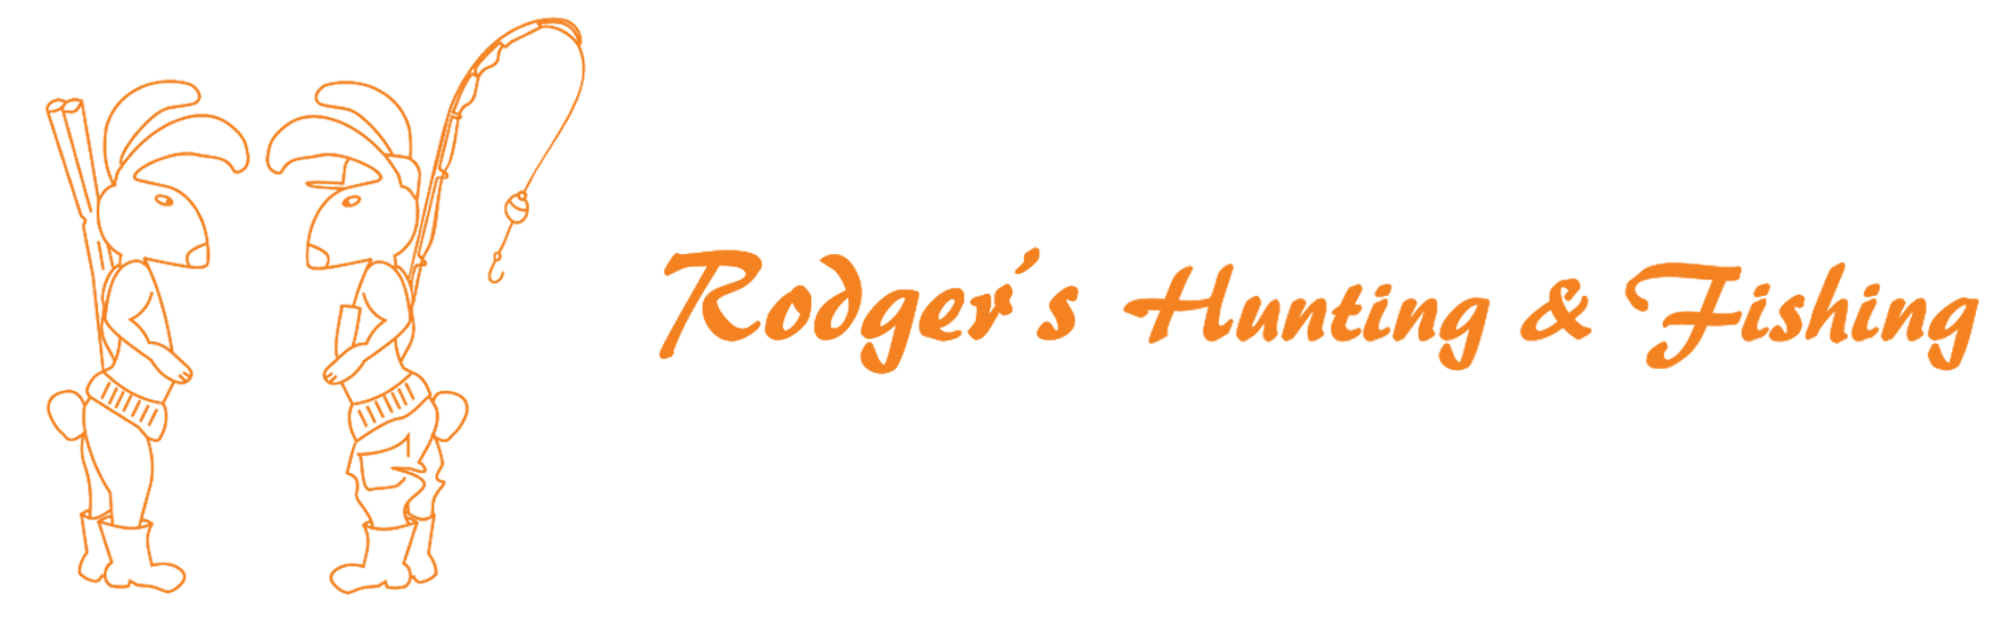 Rodger's Hunting and Fishing